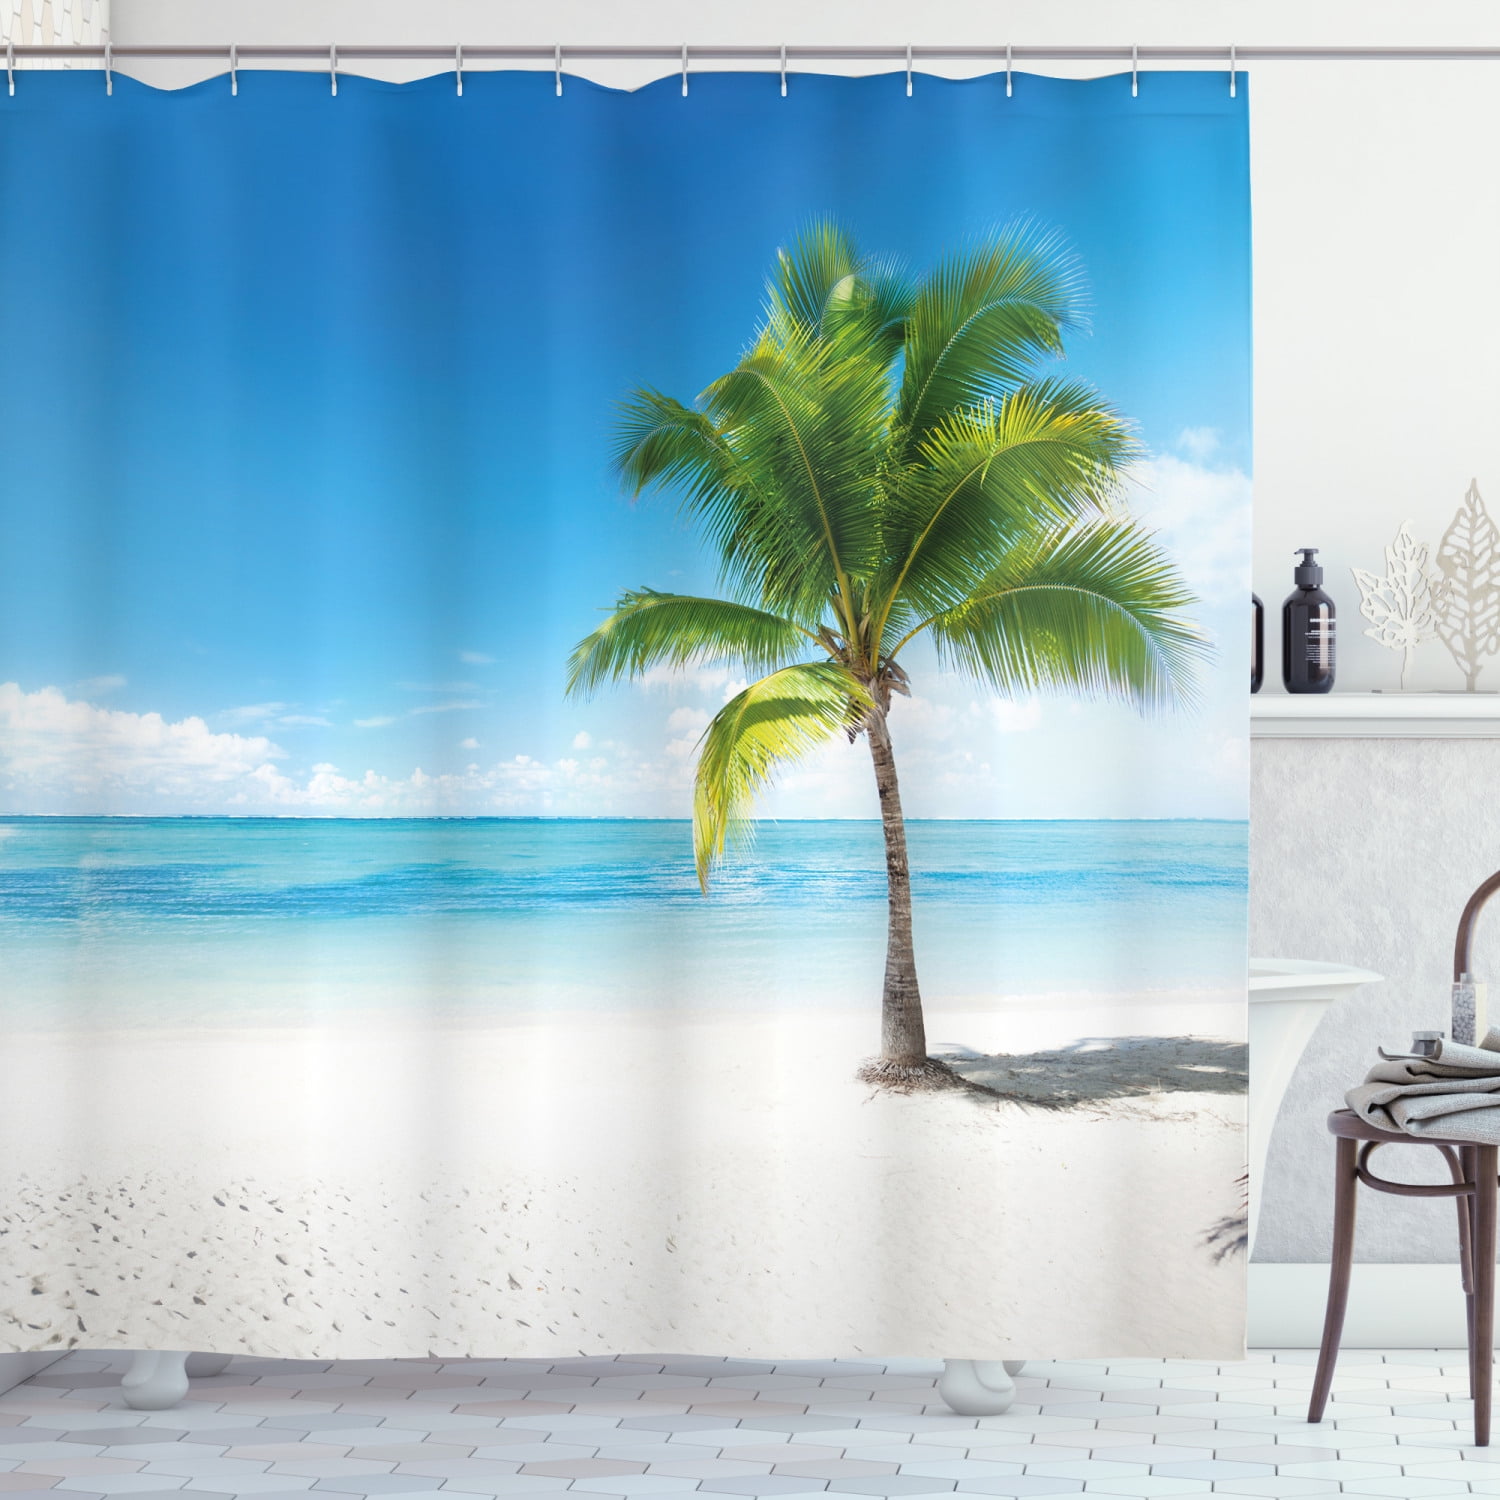 Hot 3D Photo Printing Turkey Seaside Town Window Curtains Blockout Drapes Fabric 